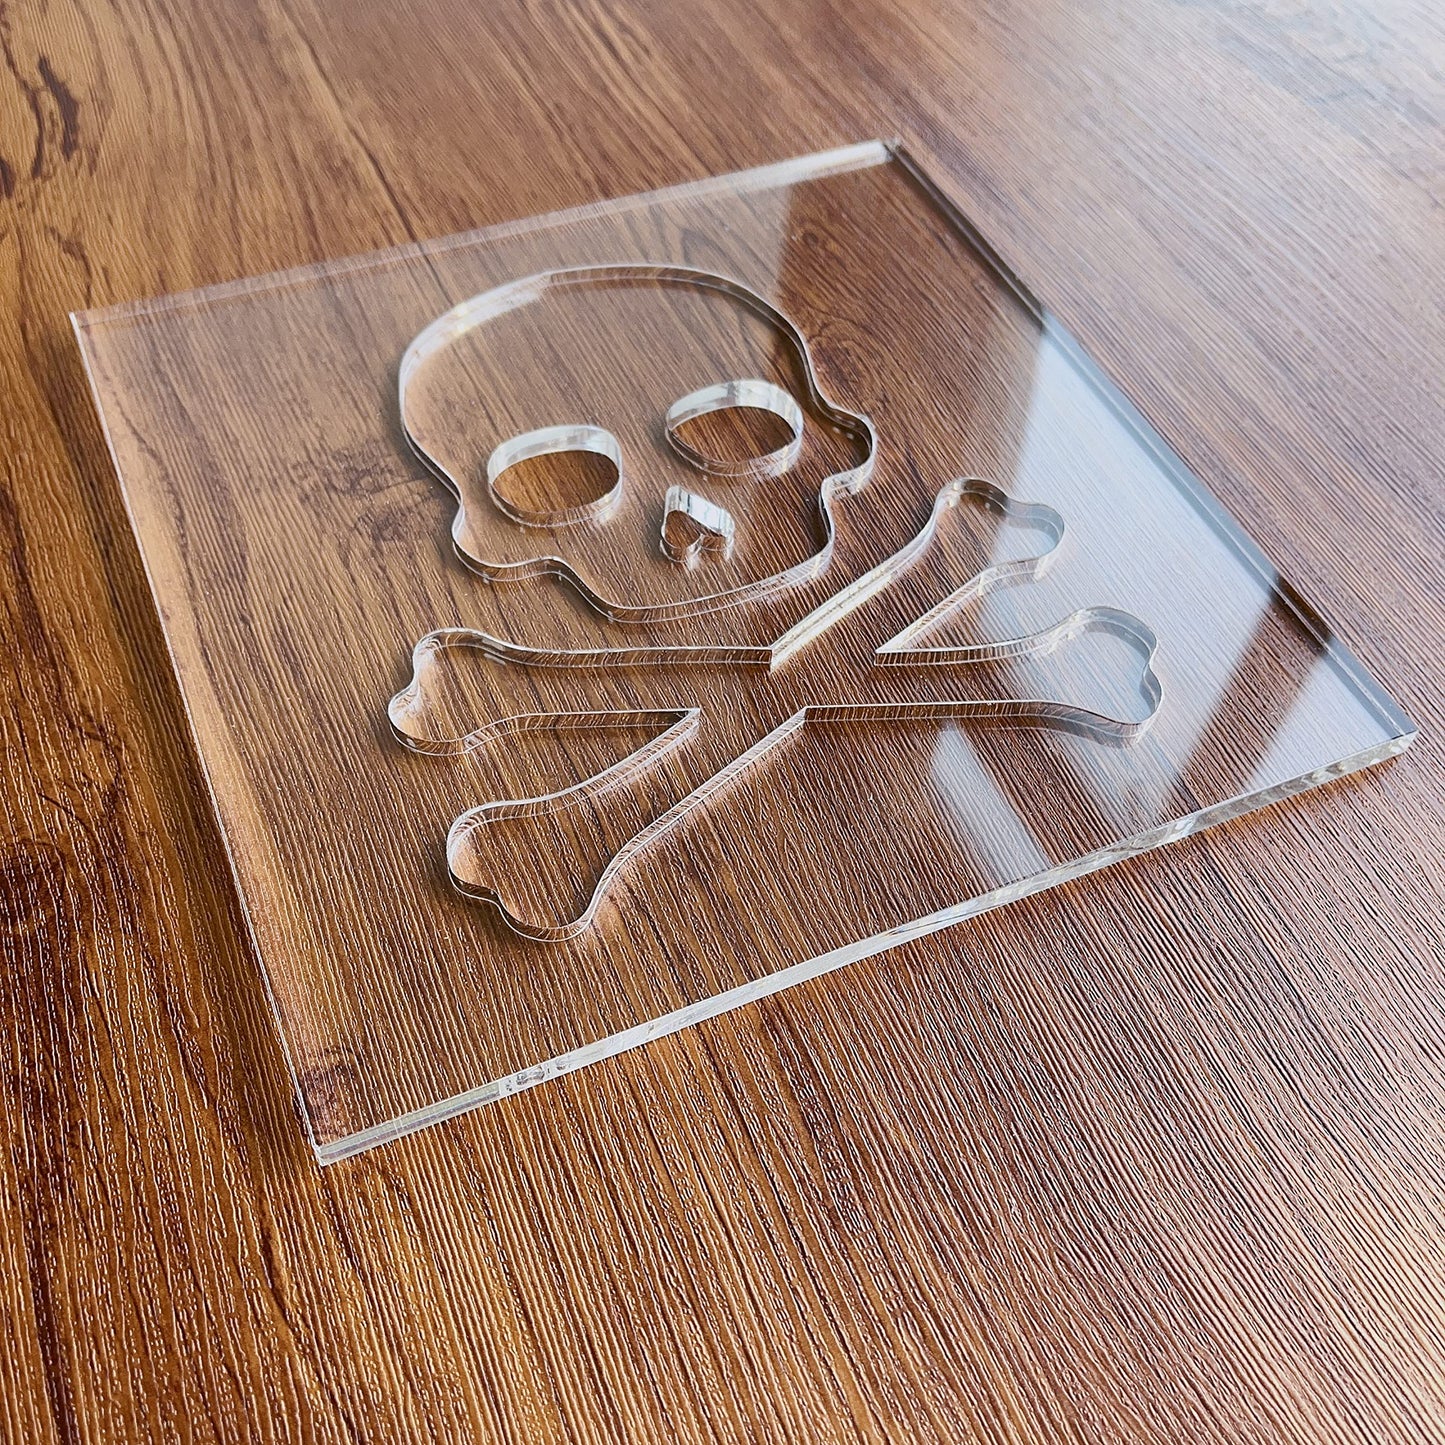 Skull Router Template, Clear Acrylic Template, Woodworking Router Template